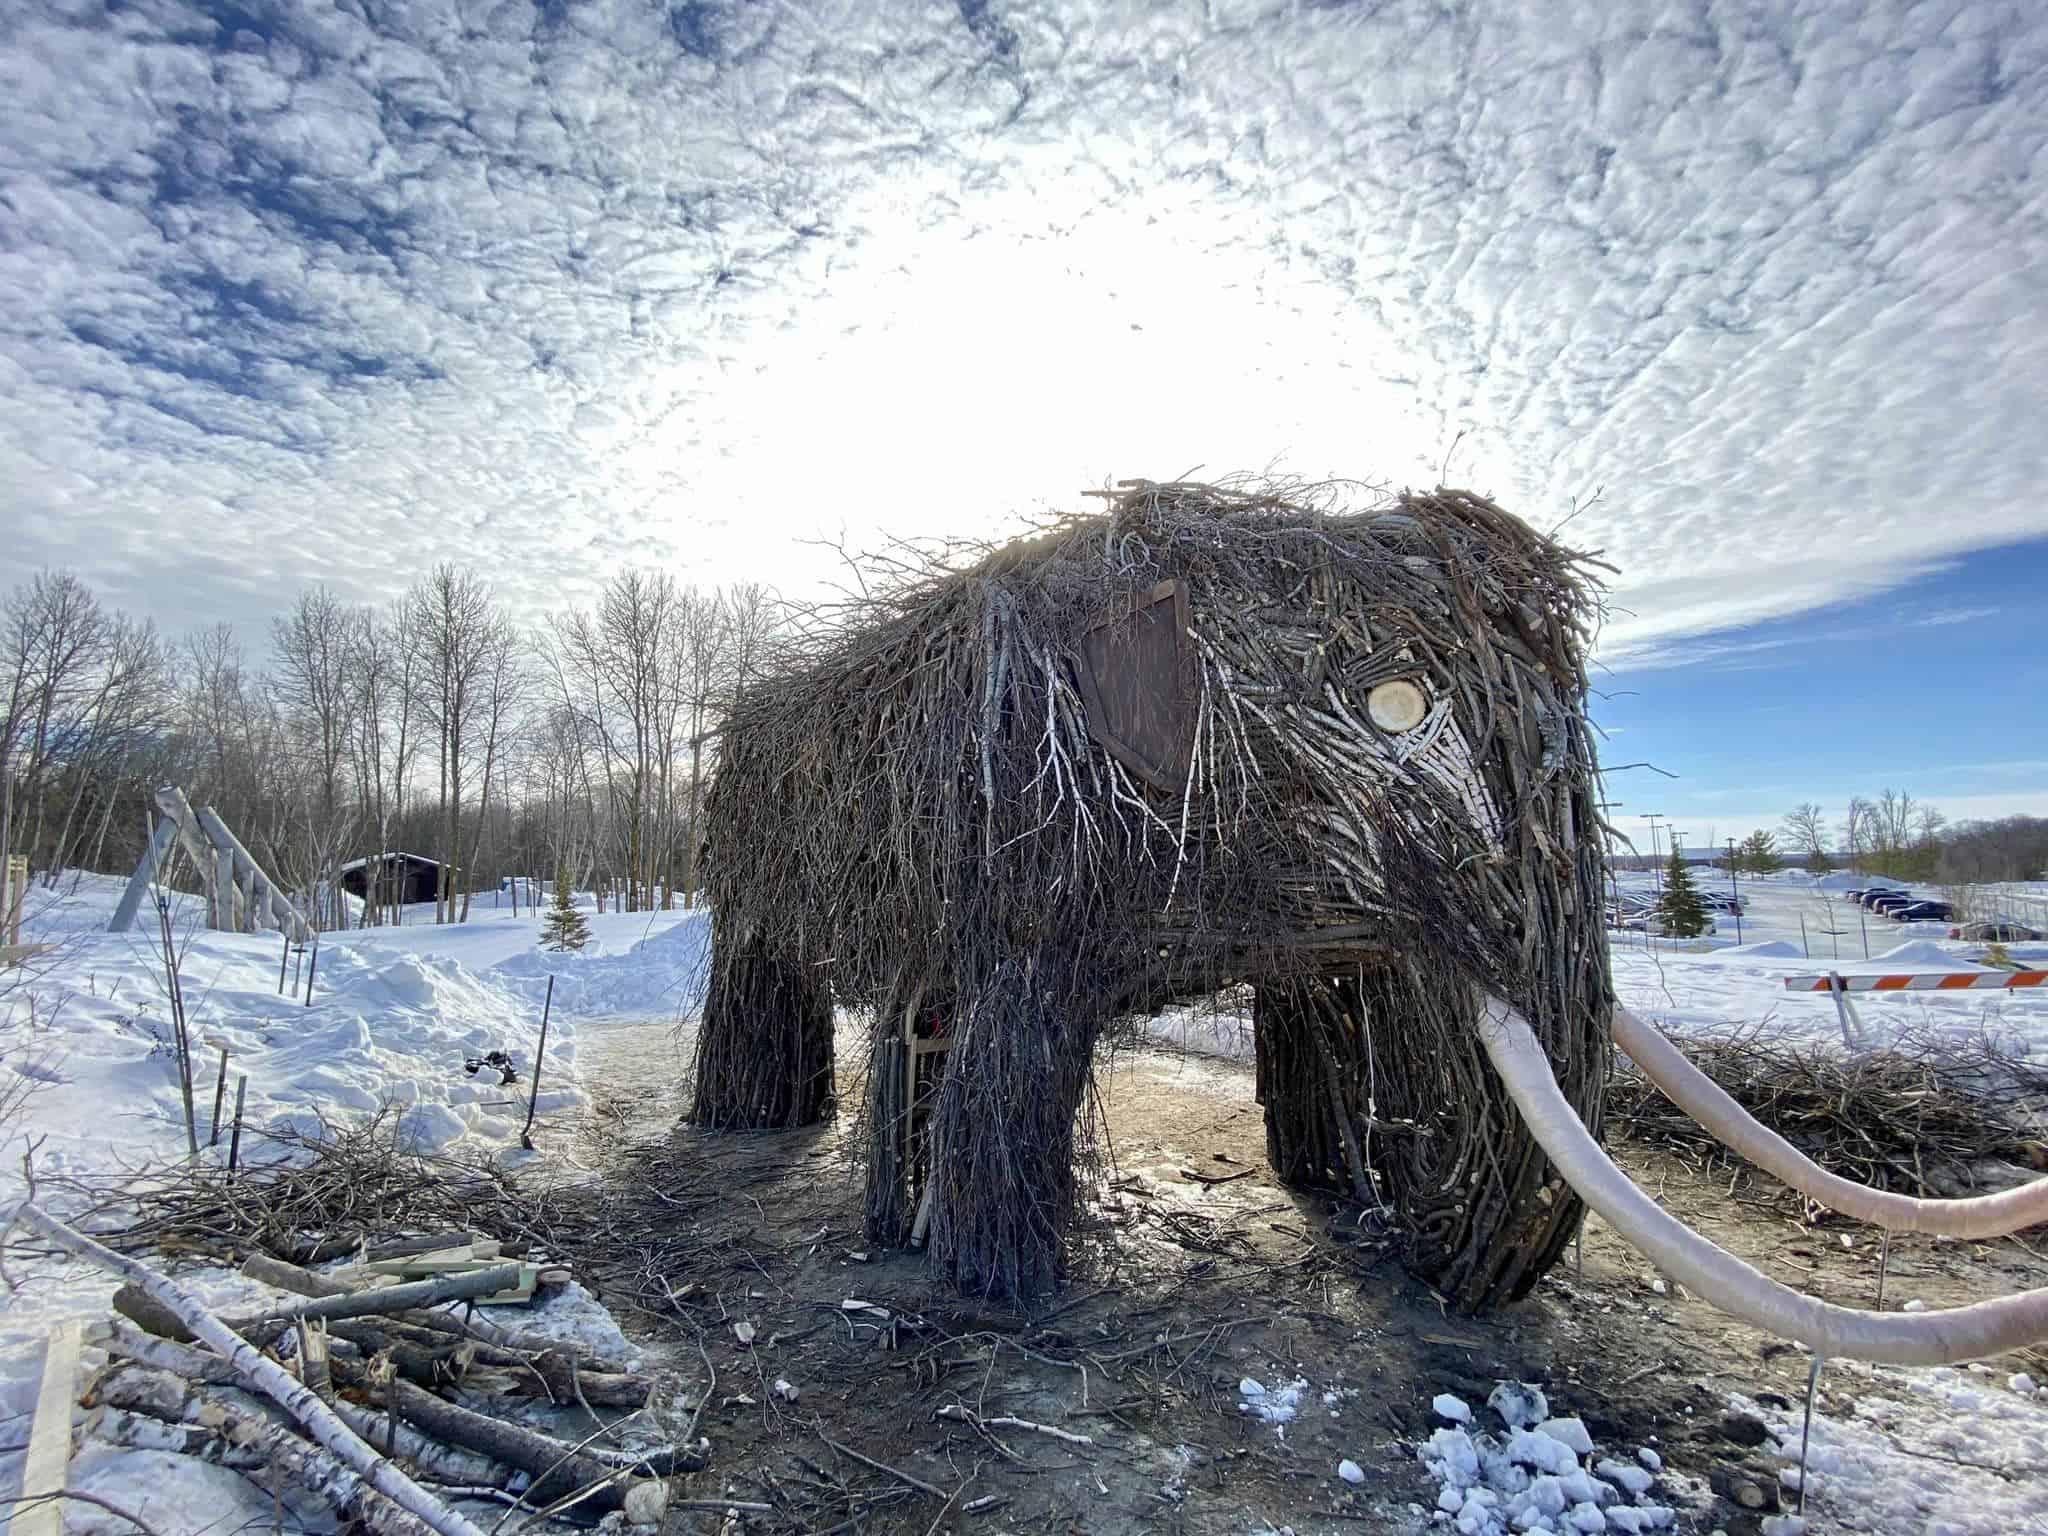 "Mashaal the Mammoth" • at Detroit Mountain • Artist: Leonic Collective